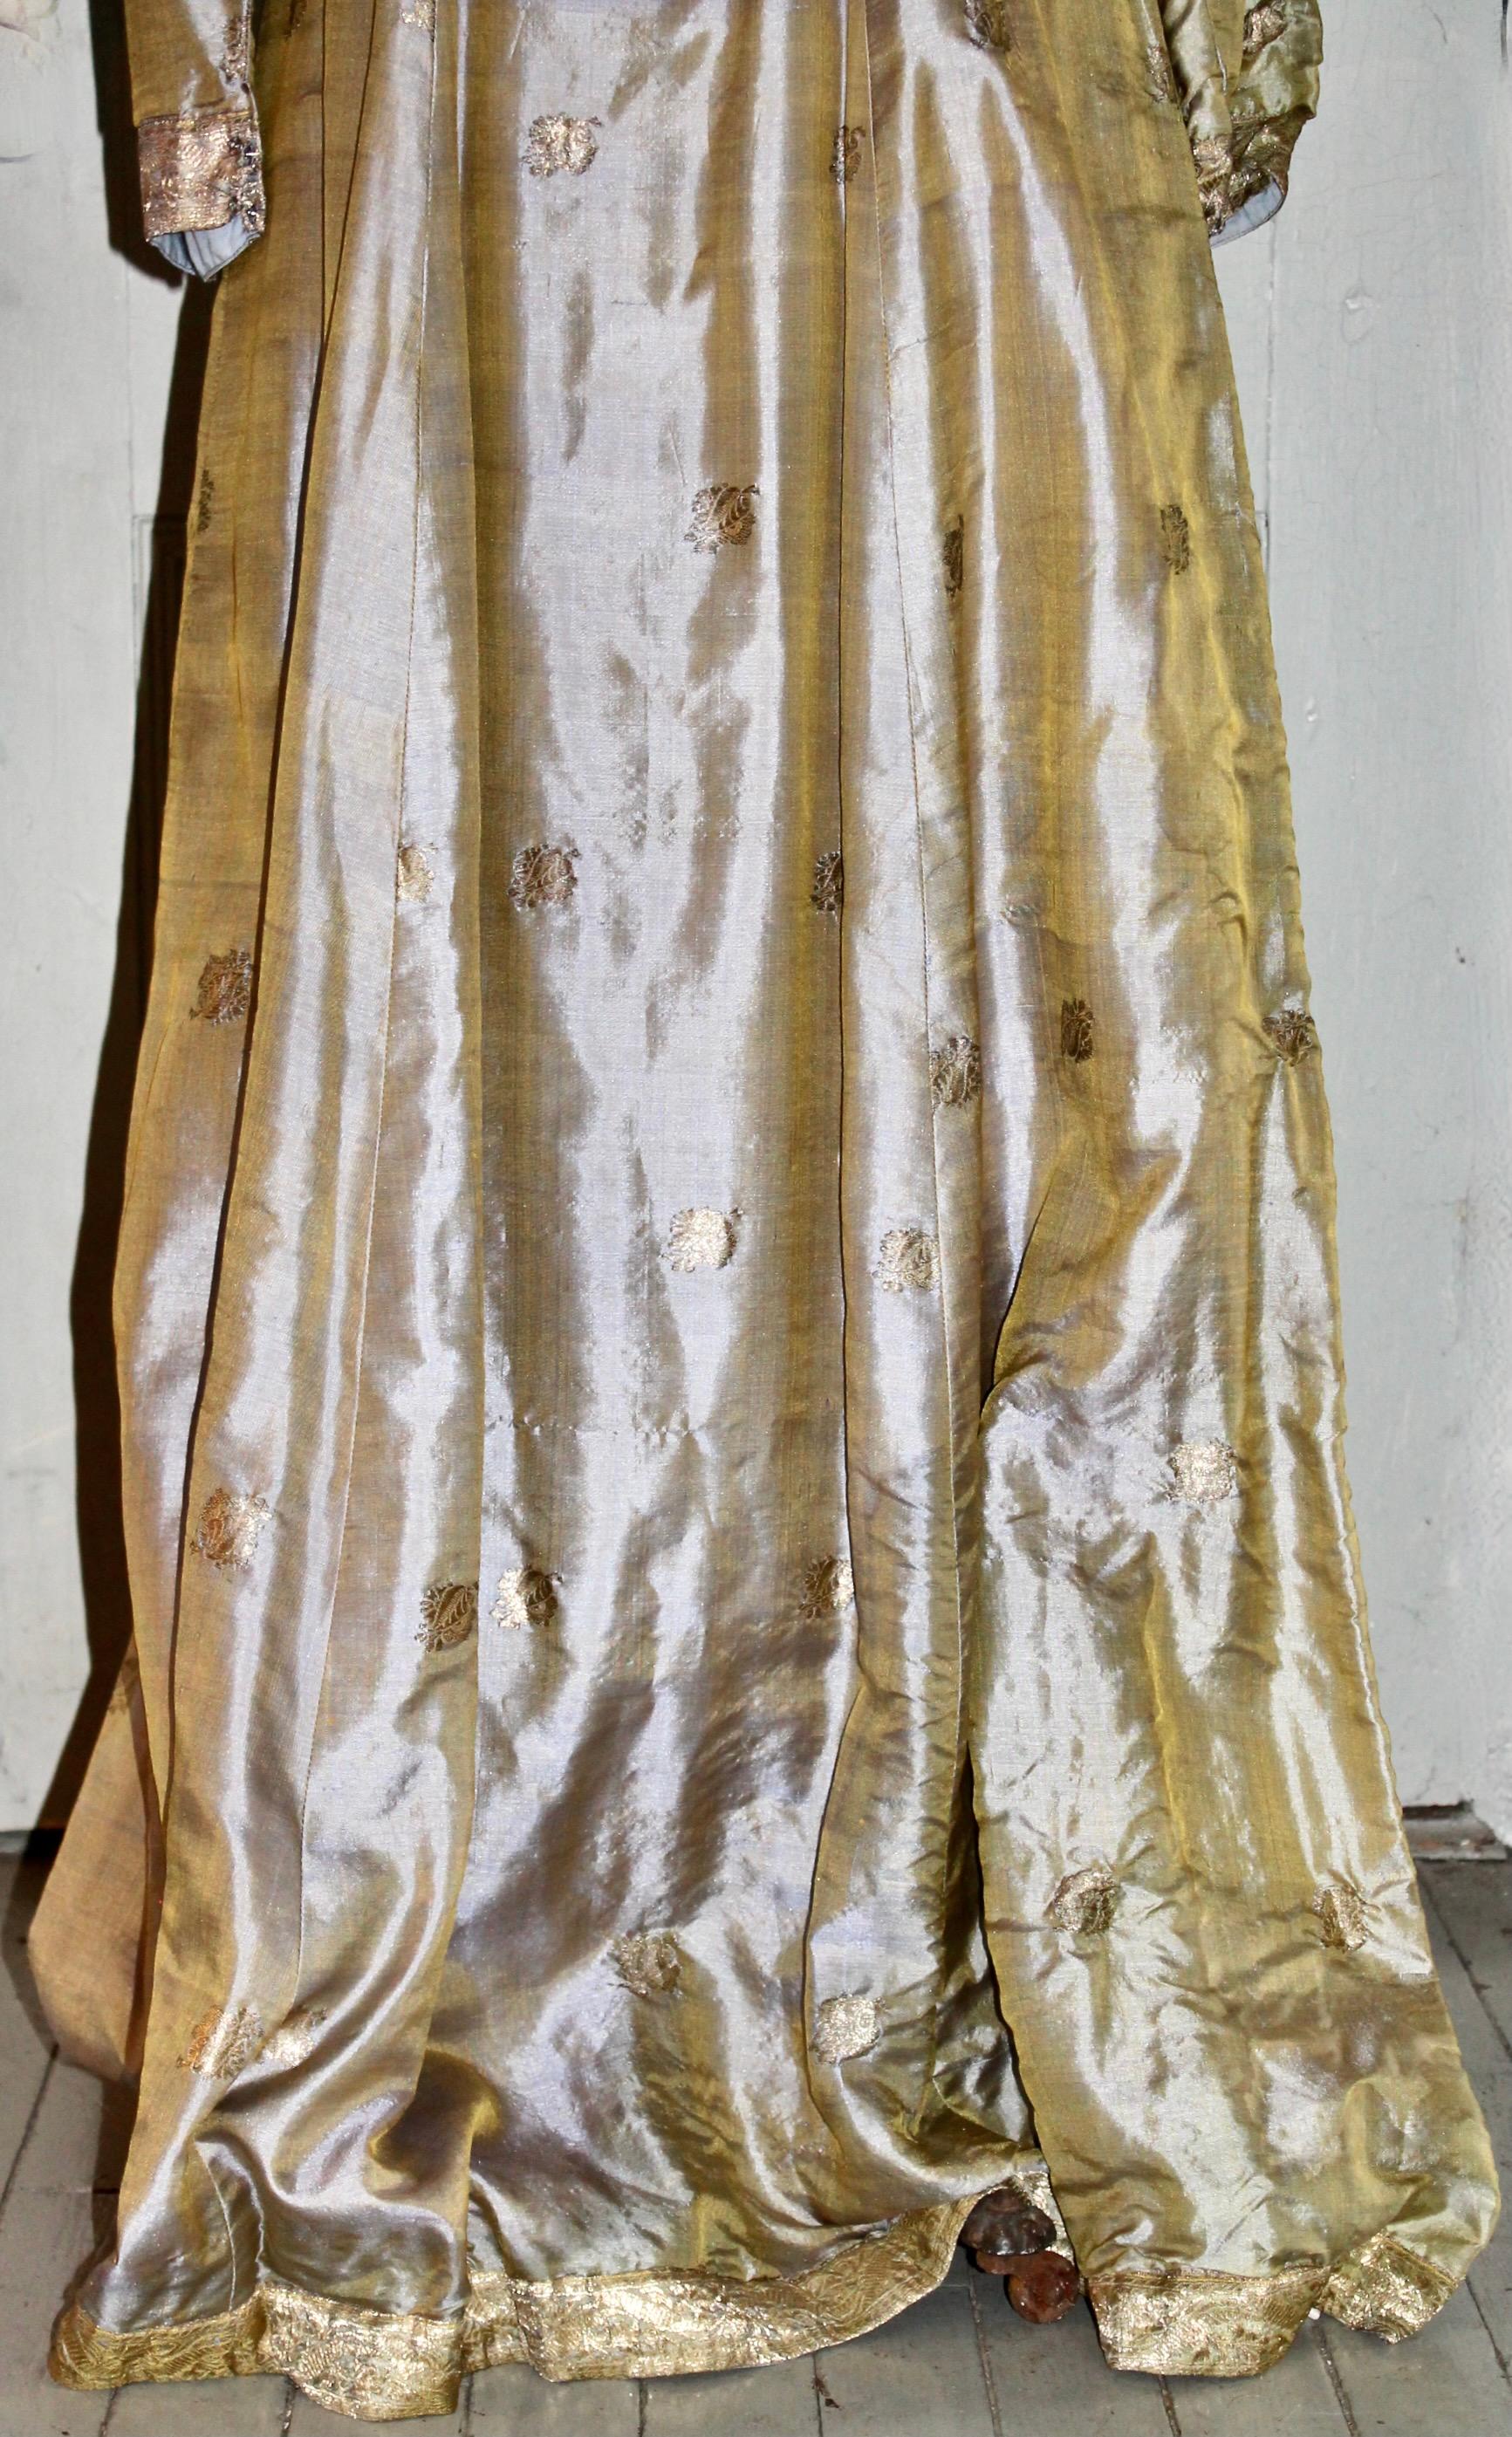 A rare 1960's formal dress by important American designer Gertrude Arzt of Huntington Texas.  Indian inspired overall pattern in gold thread on a satin/silk morphing color from yellow to violet. Lined.